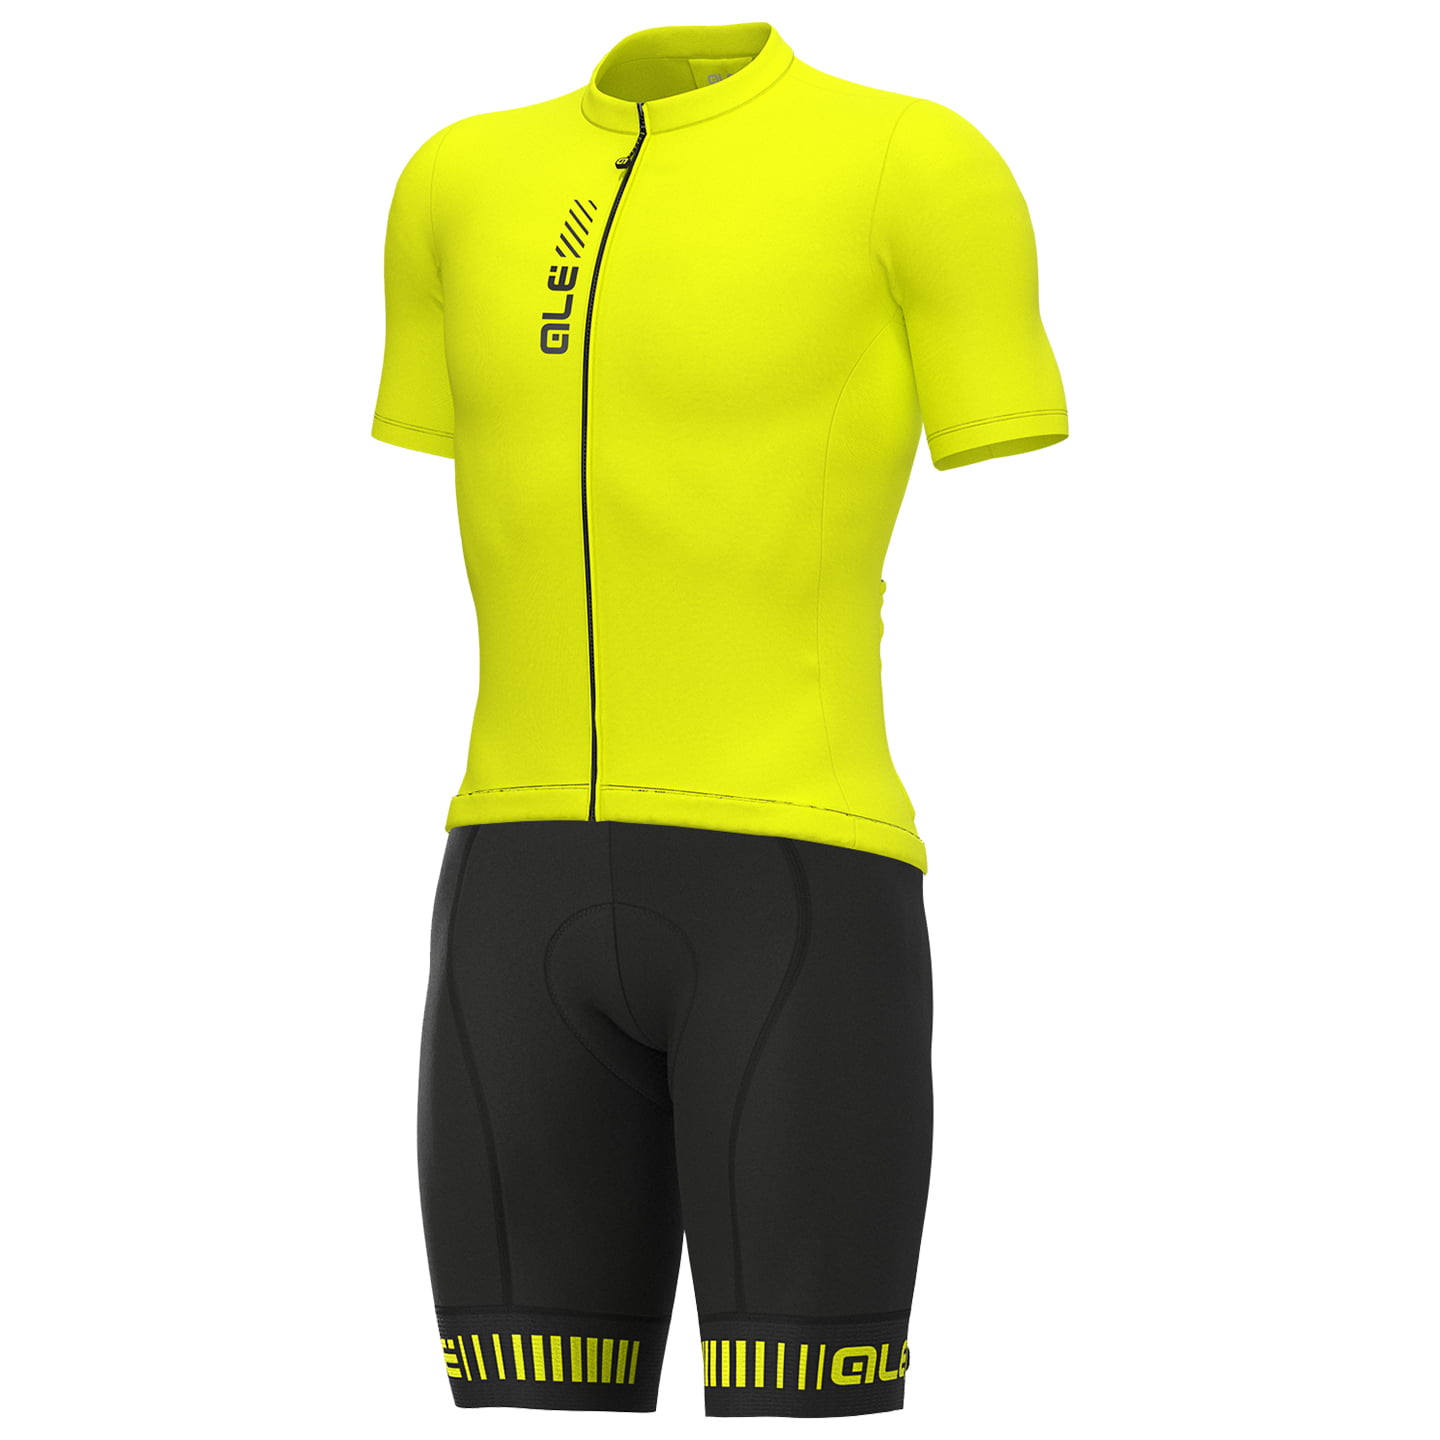 ALE Color Block Set (cycling jersey + cycling shorts) Set (2 pieces), for men